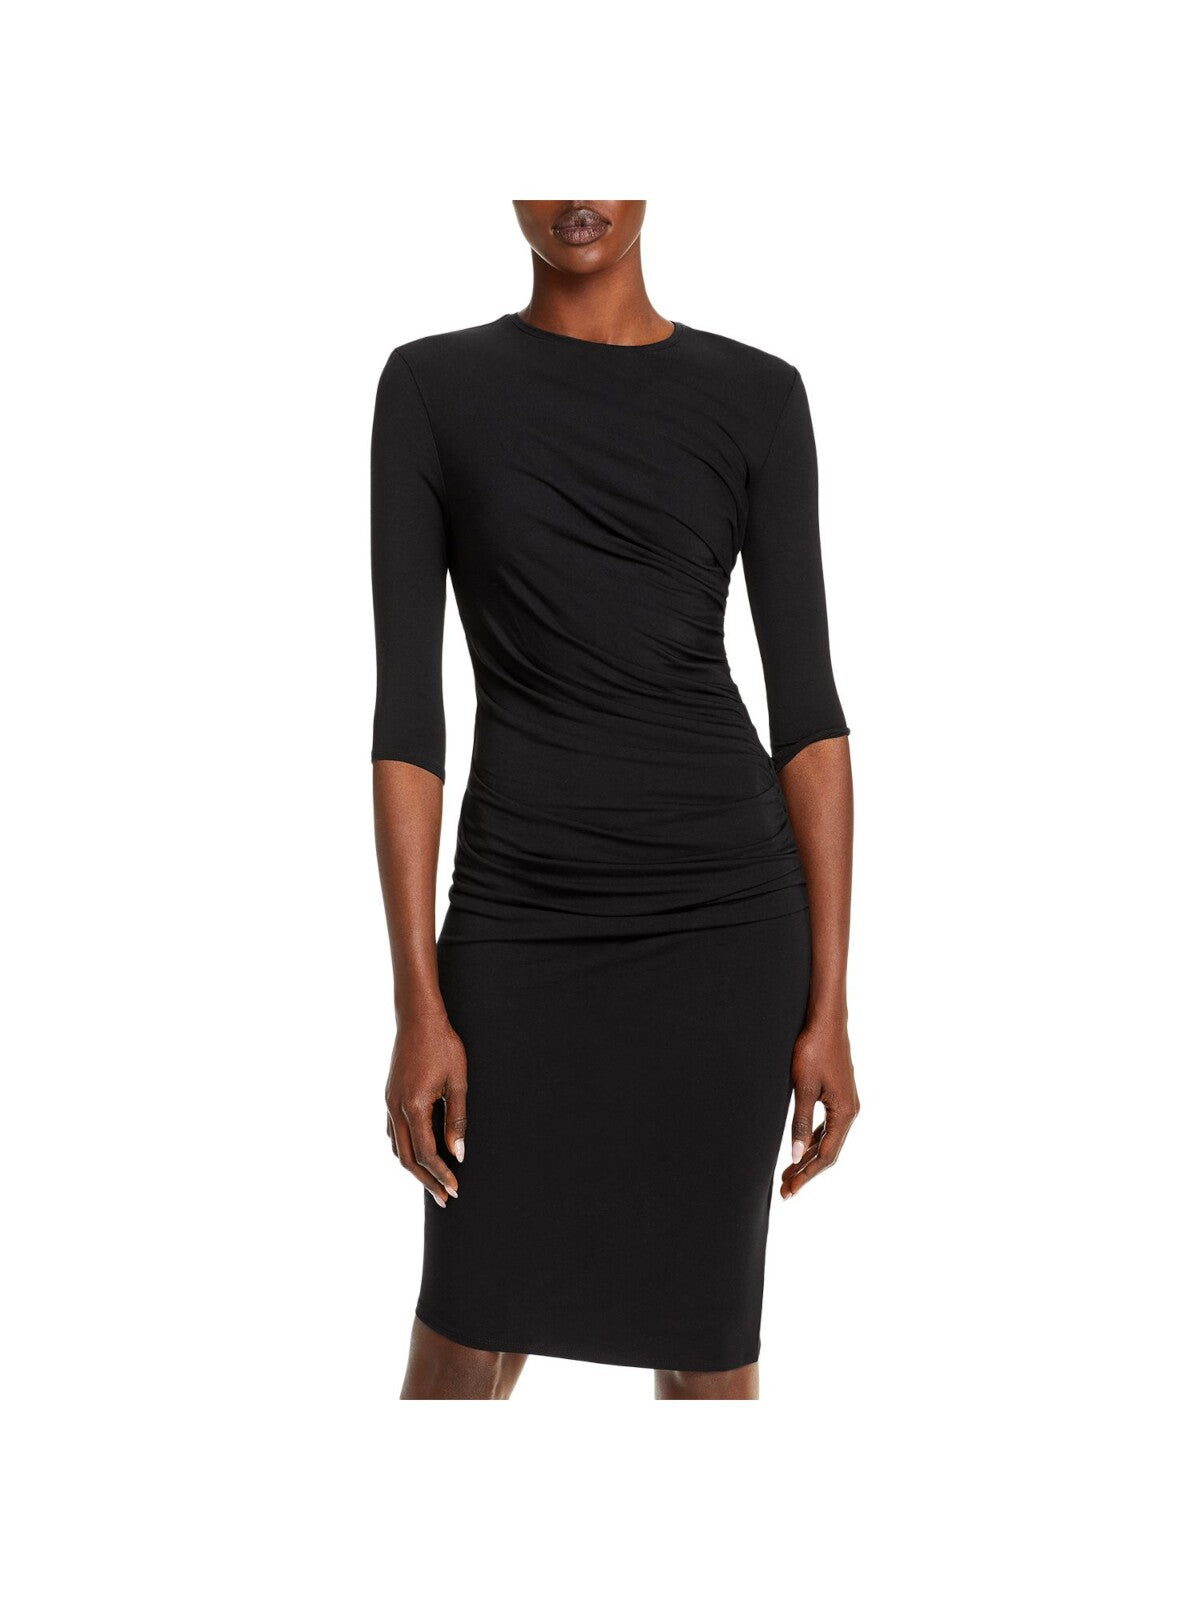 HELMUT LANG Womens Black Stretch Ruched Jersey 3/4 Sleeve Crew Neck Knee Length Cocktail Sheath Dress S